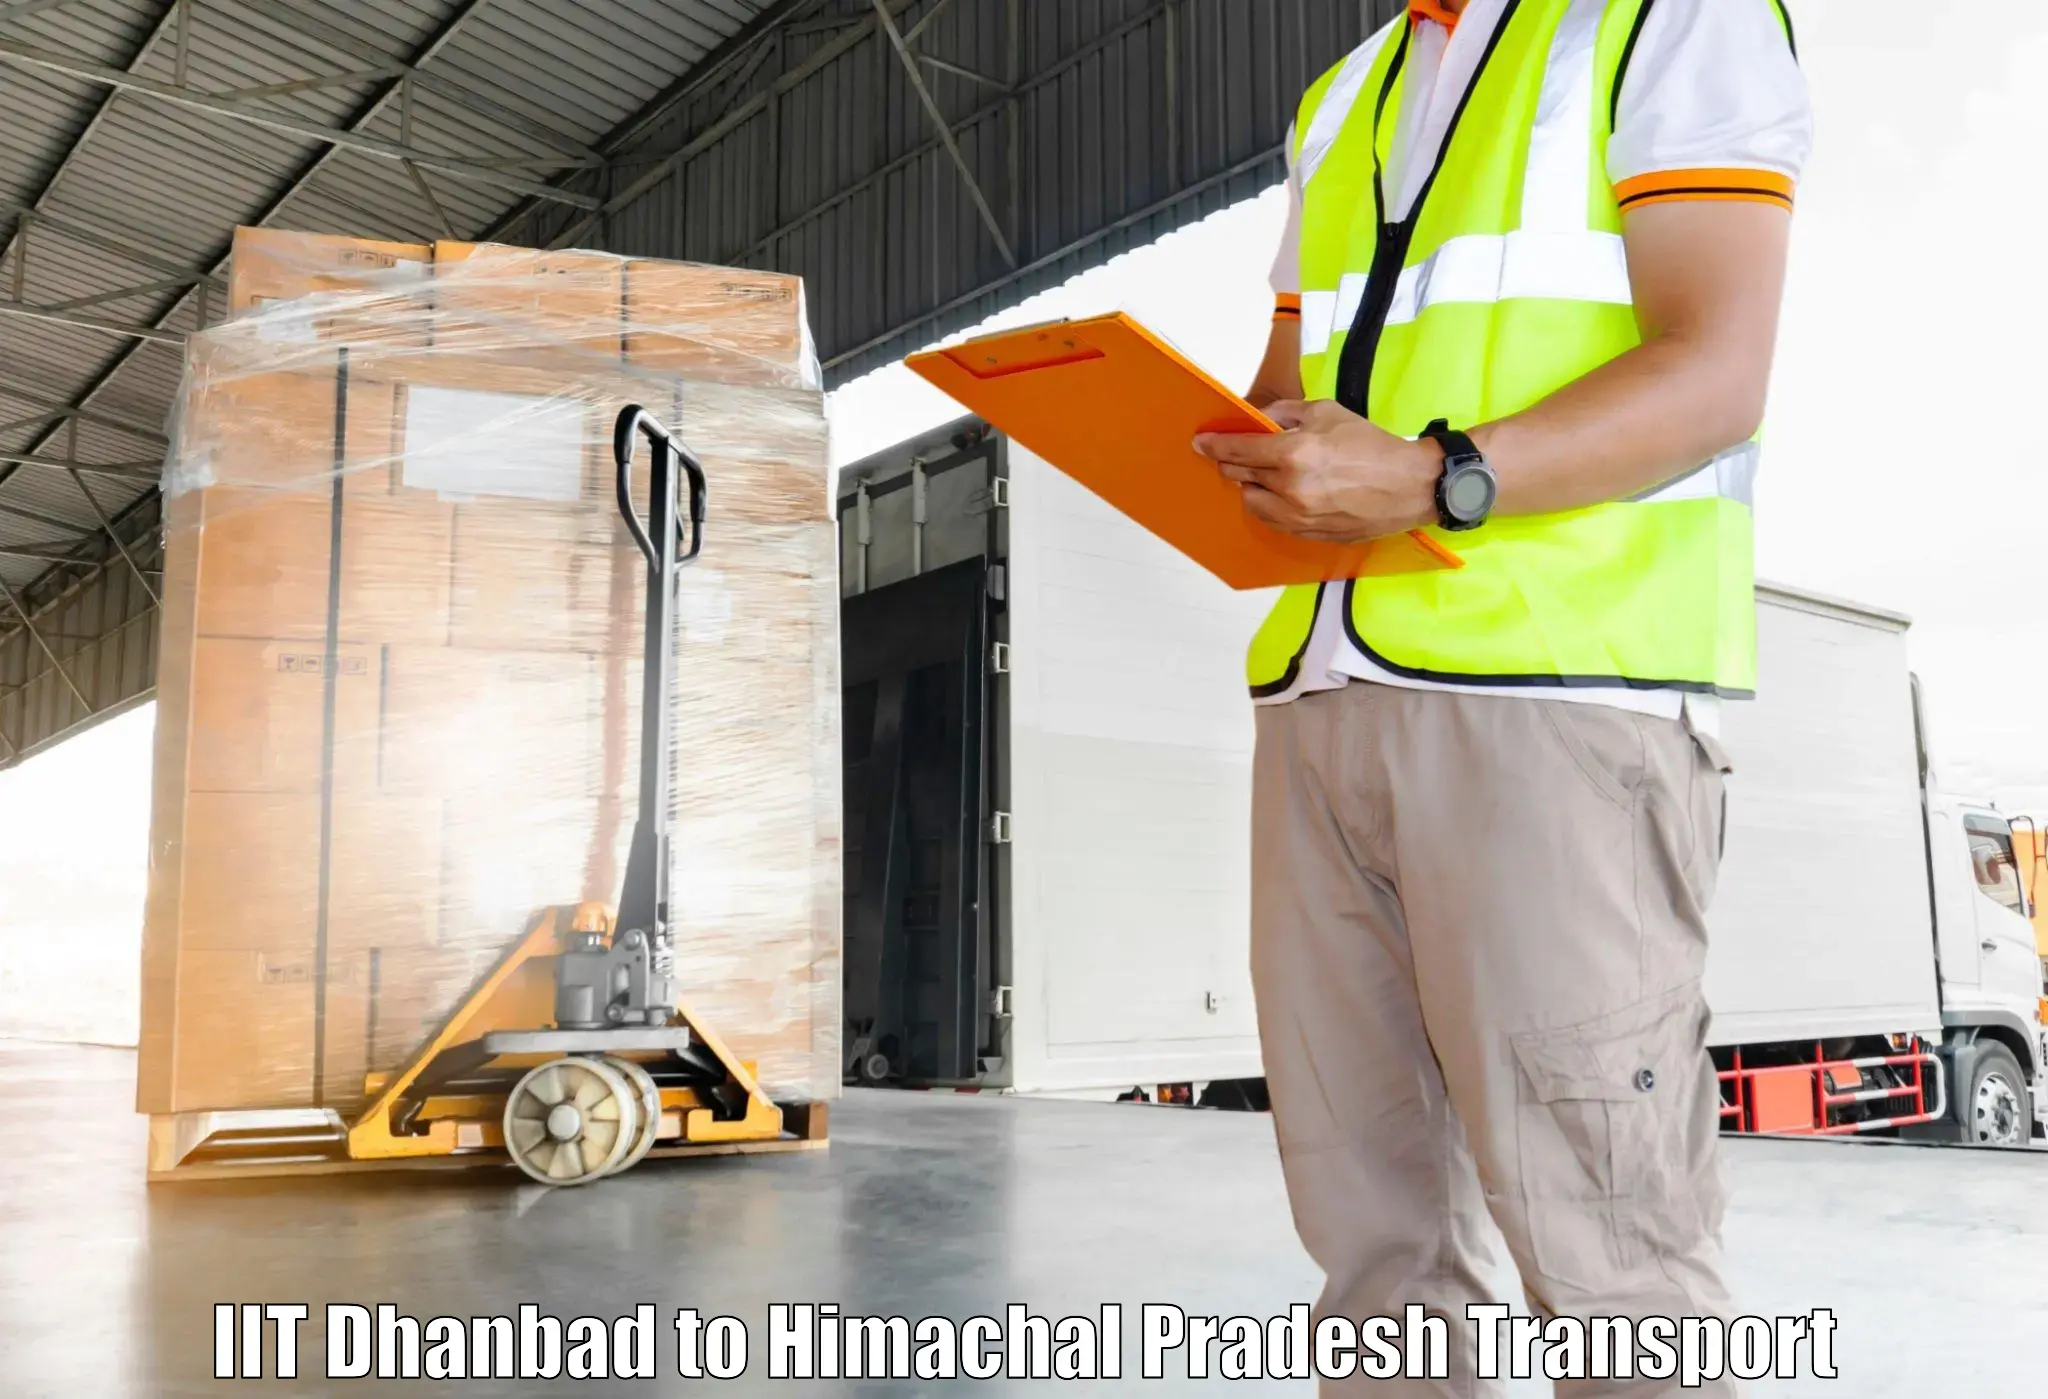 Express transport services IIT Dhanbad to Una